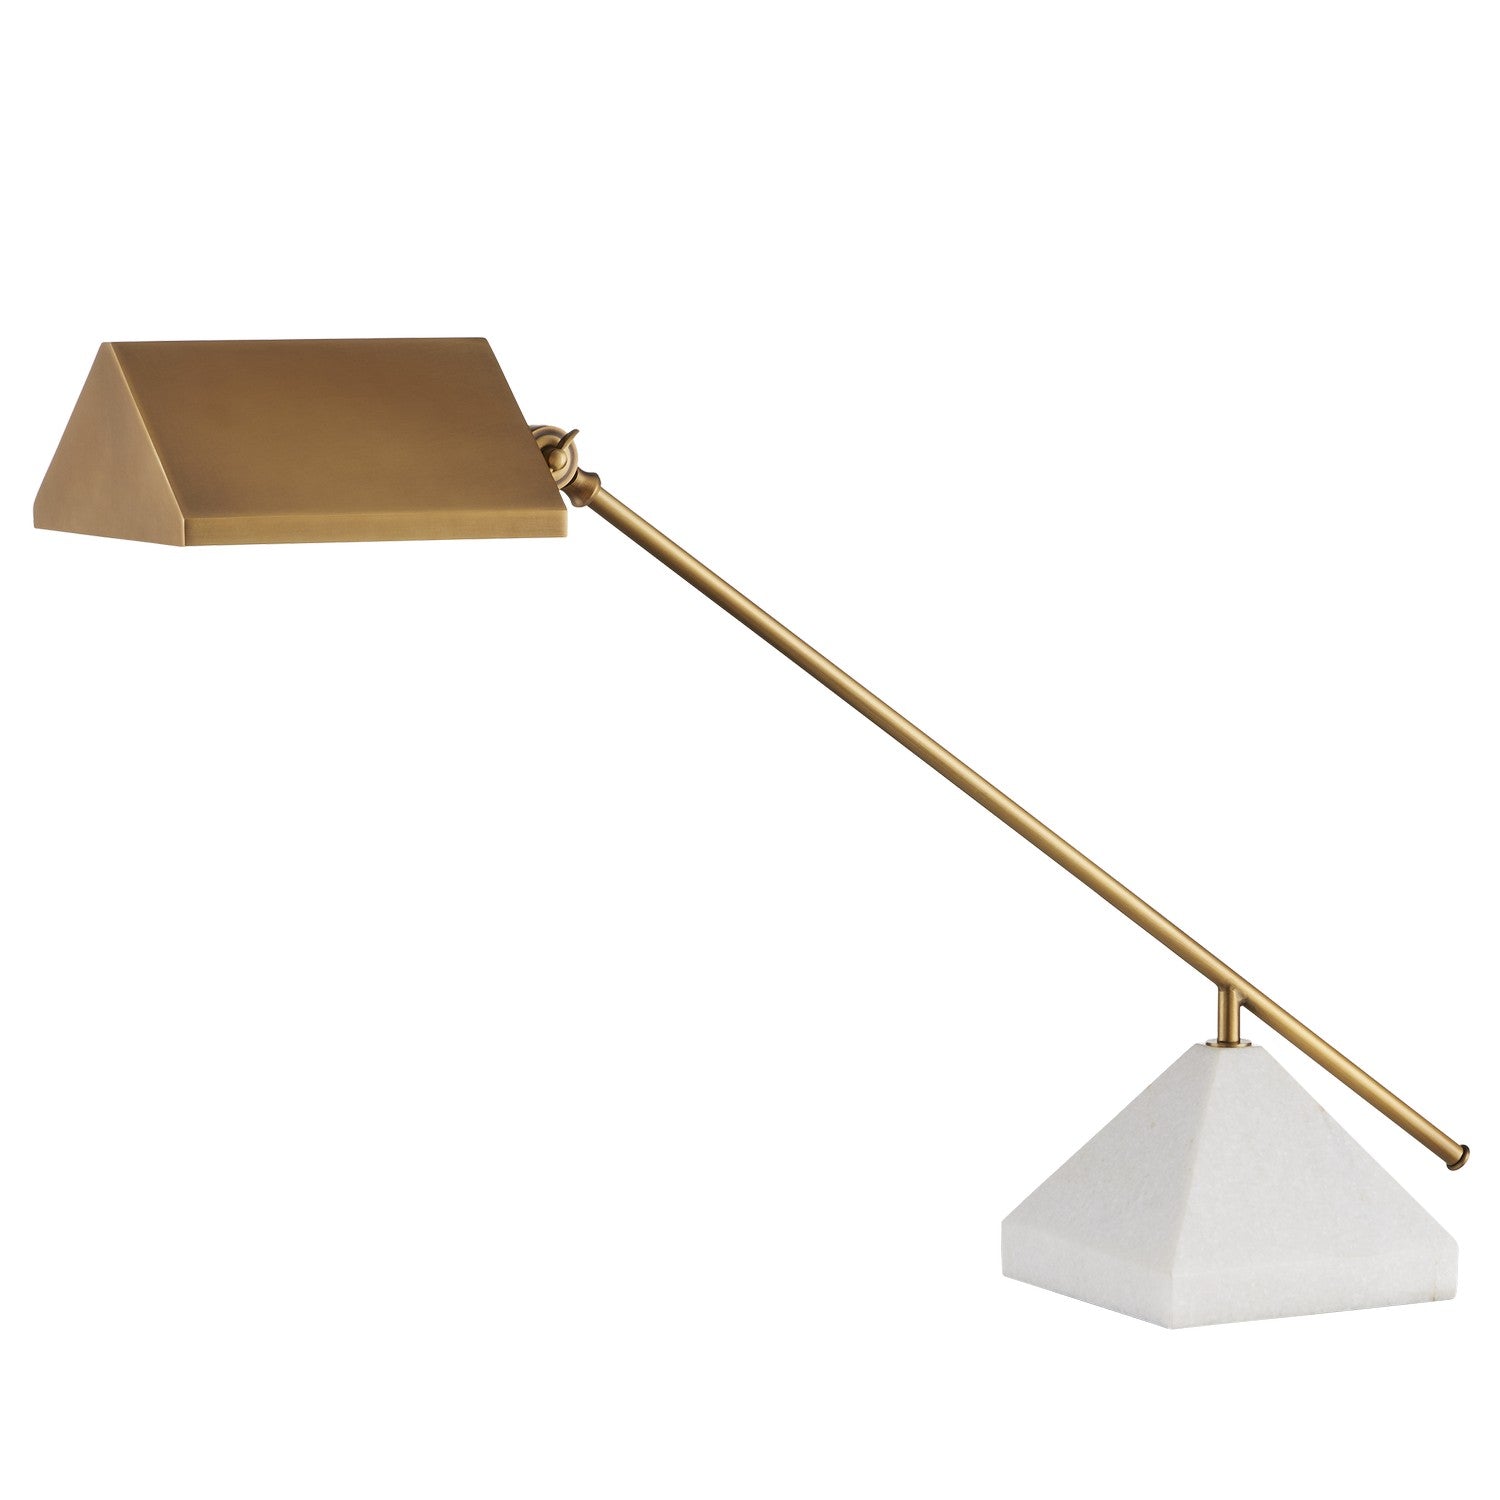 Currey and Company - One Light Table Lamp - Repertoire - Antique Brass/White- Union Lighting Luminaires Decor